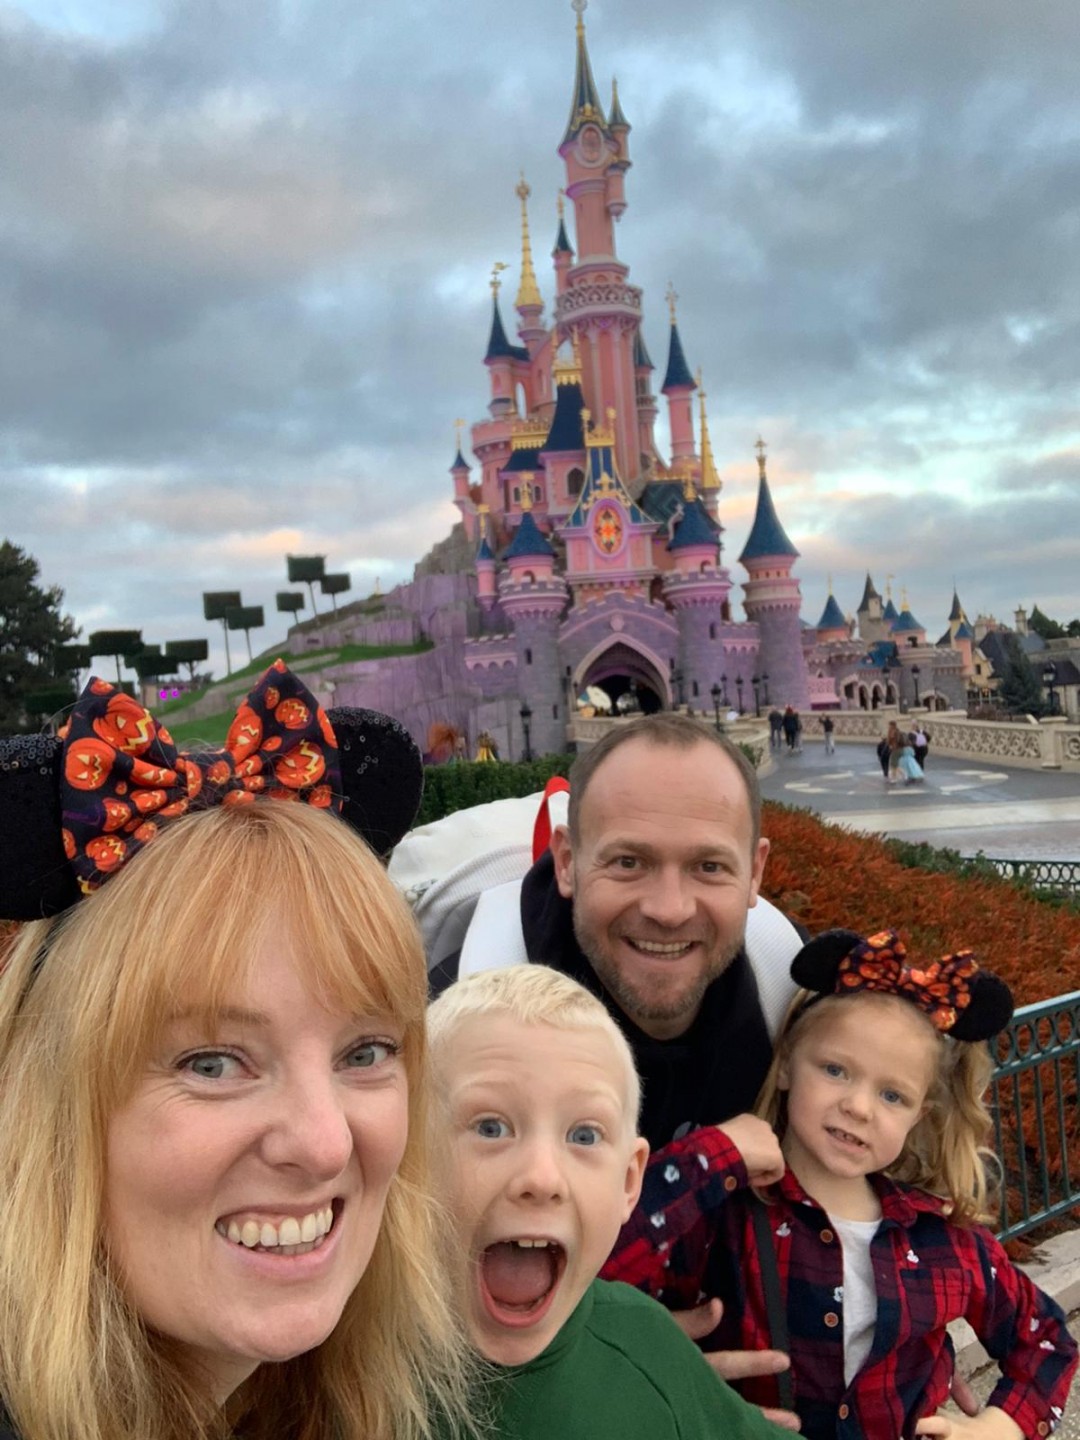 Fun times at Disneyland Paris: with and without kids - KarsTravels